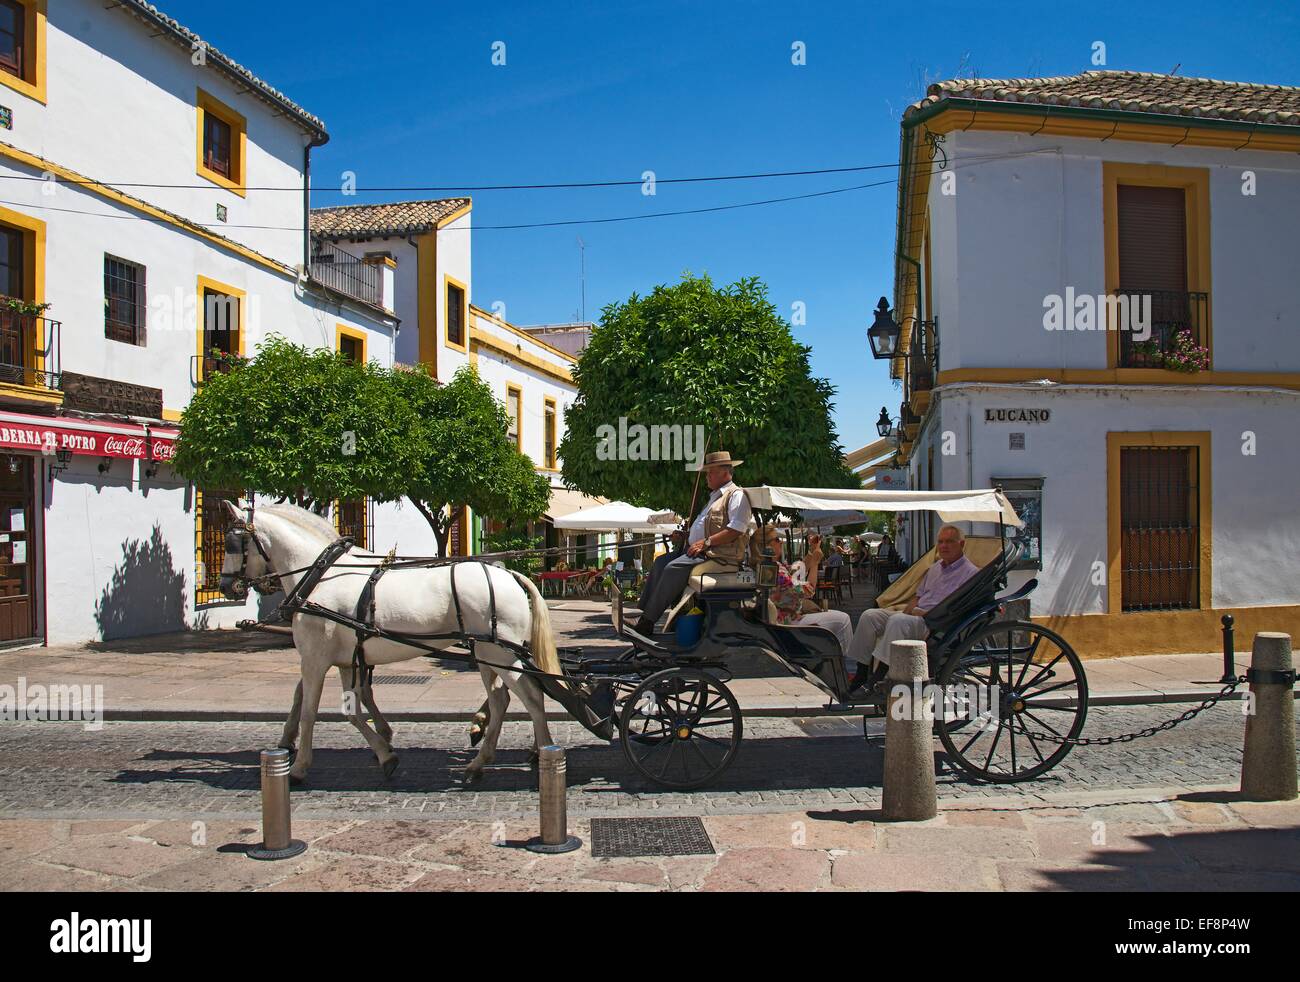 Carriage in the old town, Córdoba province, Andalucía, Spain Stock Photo